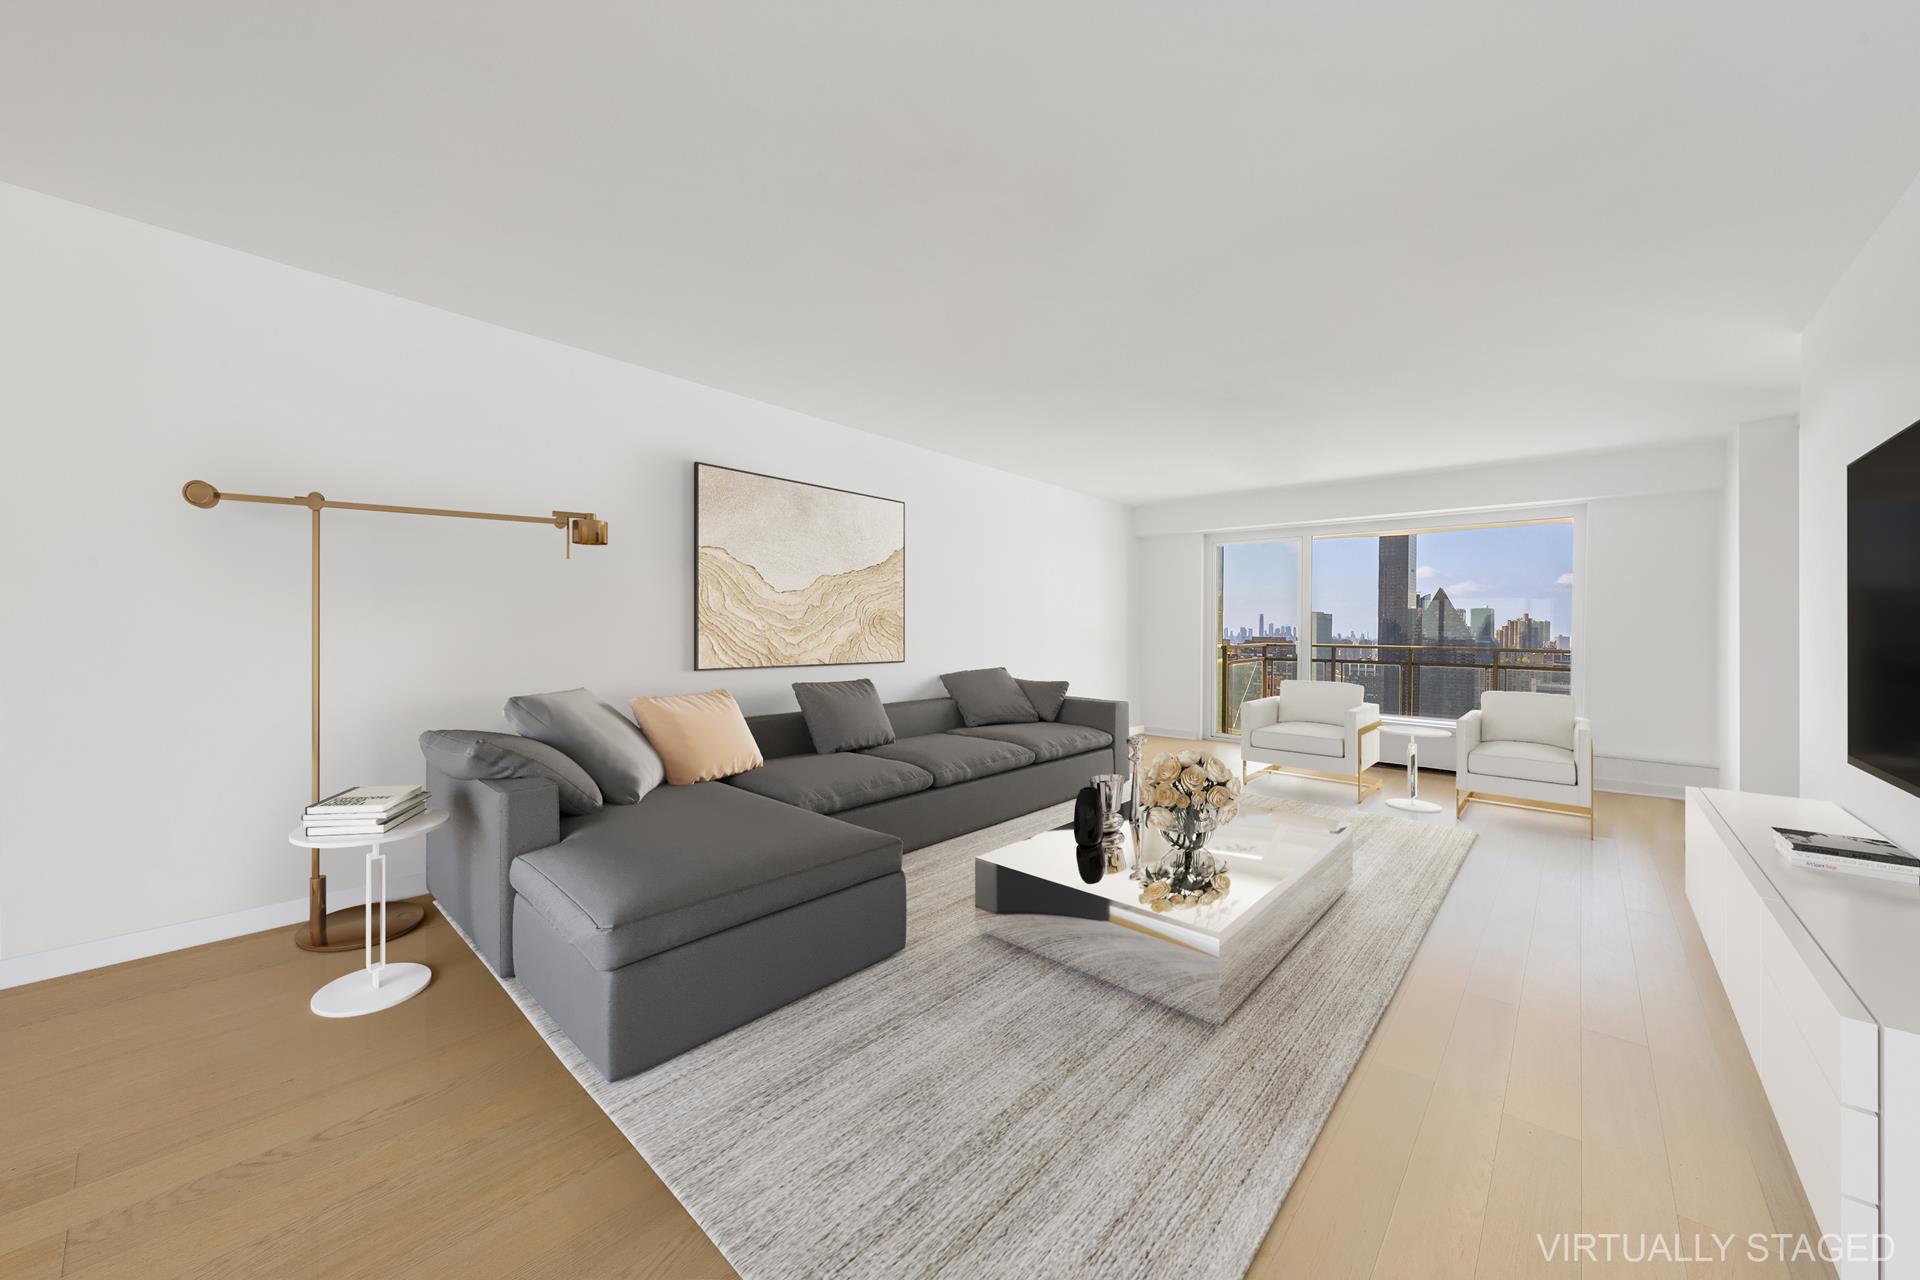 303 East 57th Street 41G, Sutton, Midtown East, NYC - 4 Bedrooms  
4 Bathrooms  
9 Rooms - 